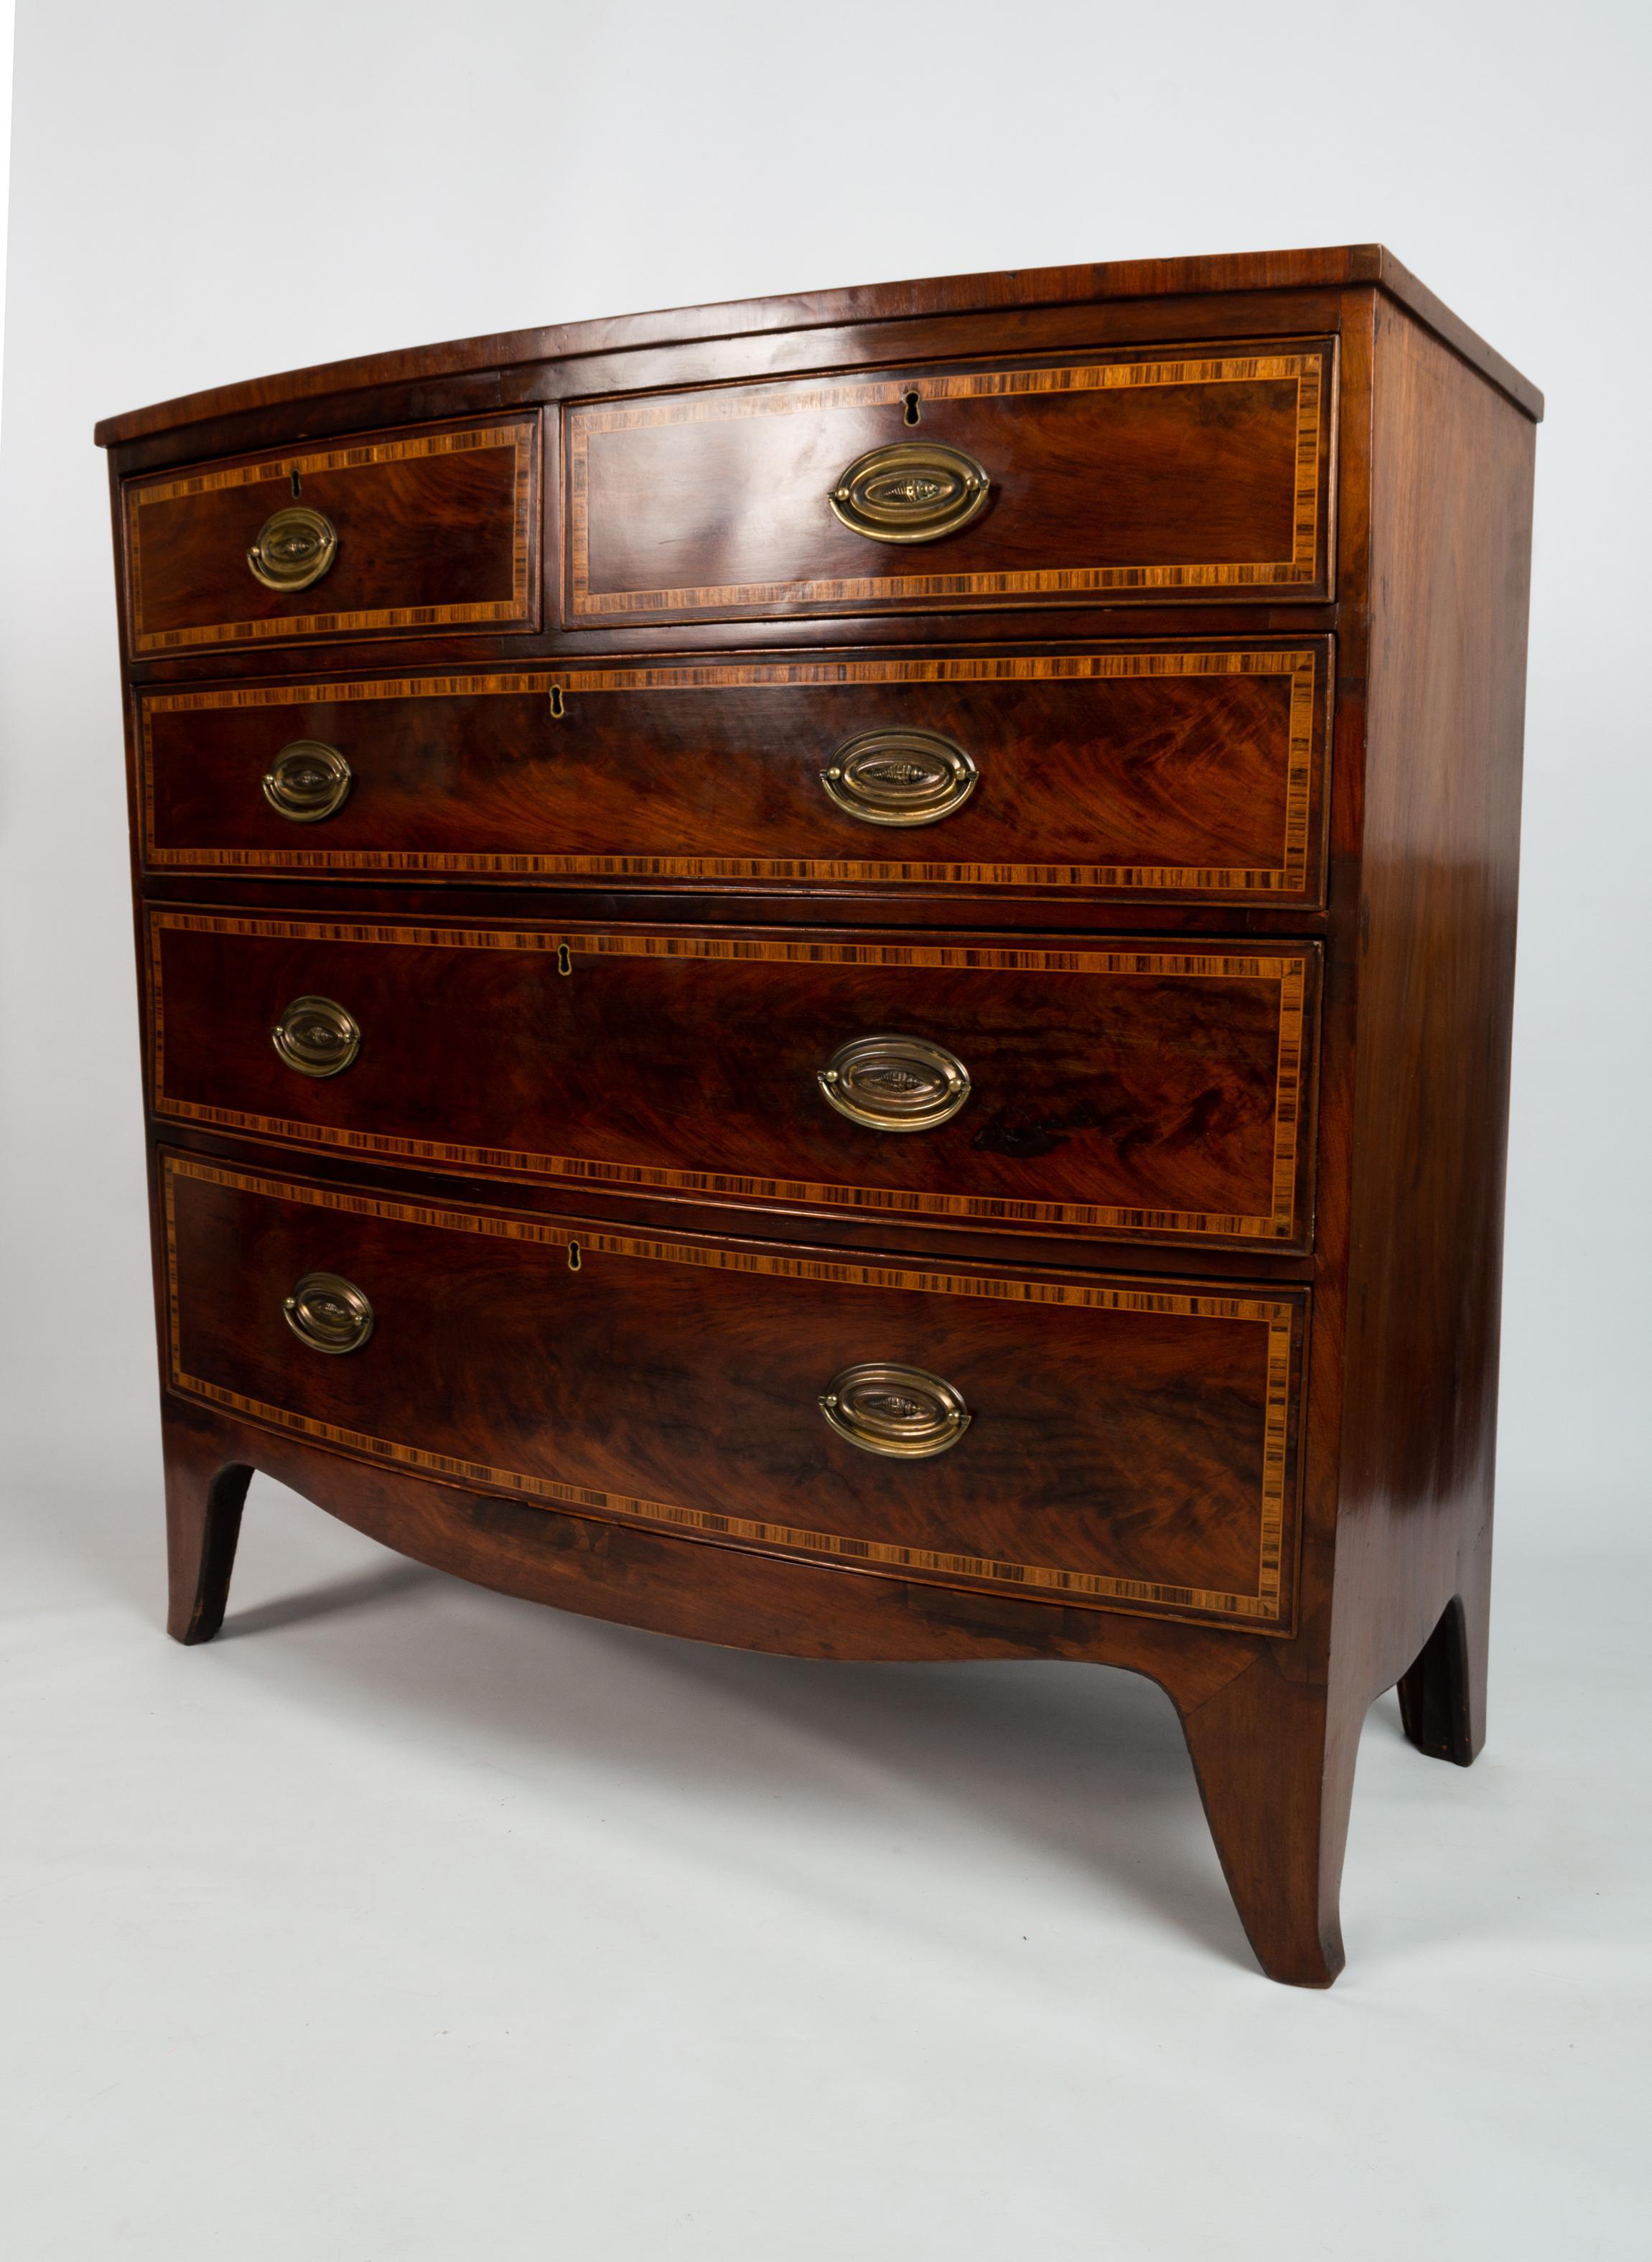 Antique English Regency Mahogany Inlaid Bow Front Chest Of Drawers C.1815 For Sale 10